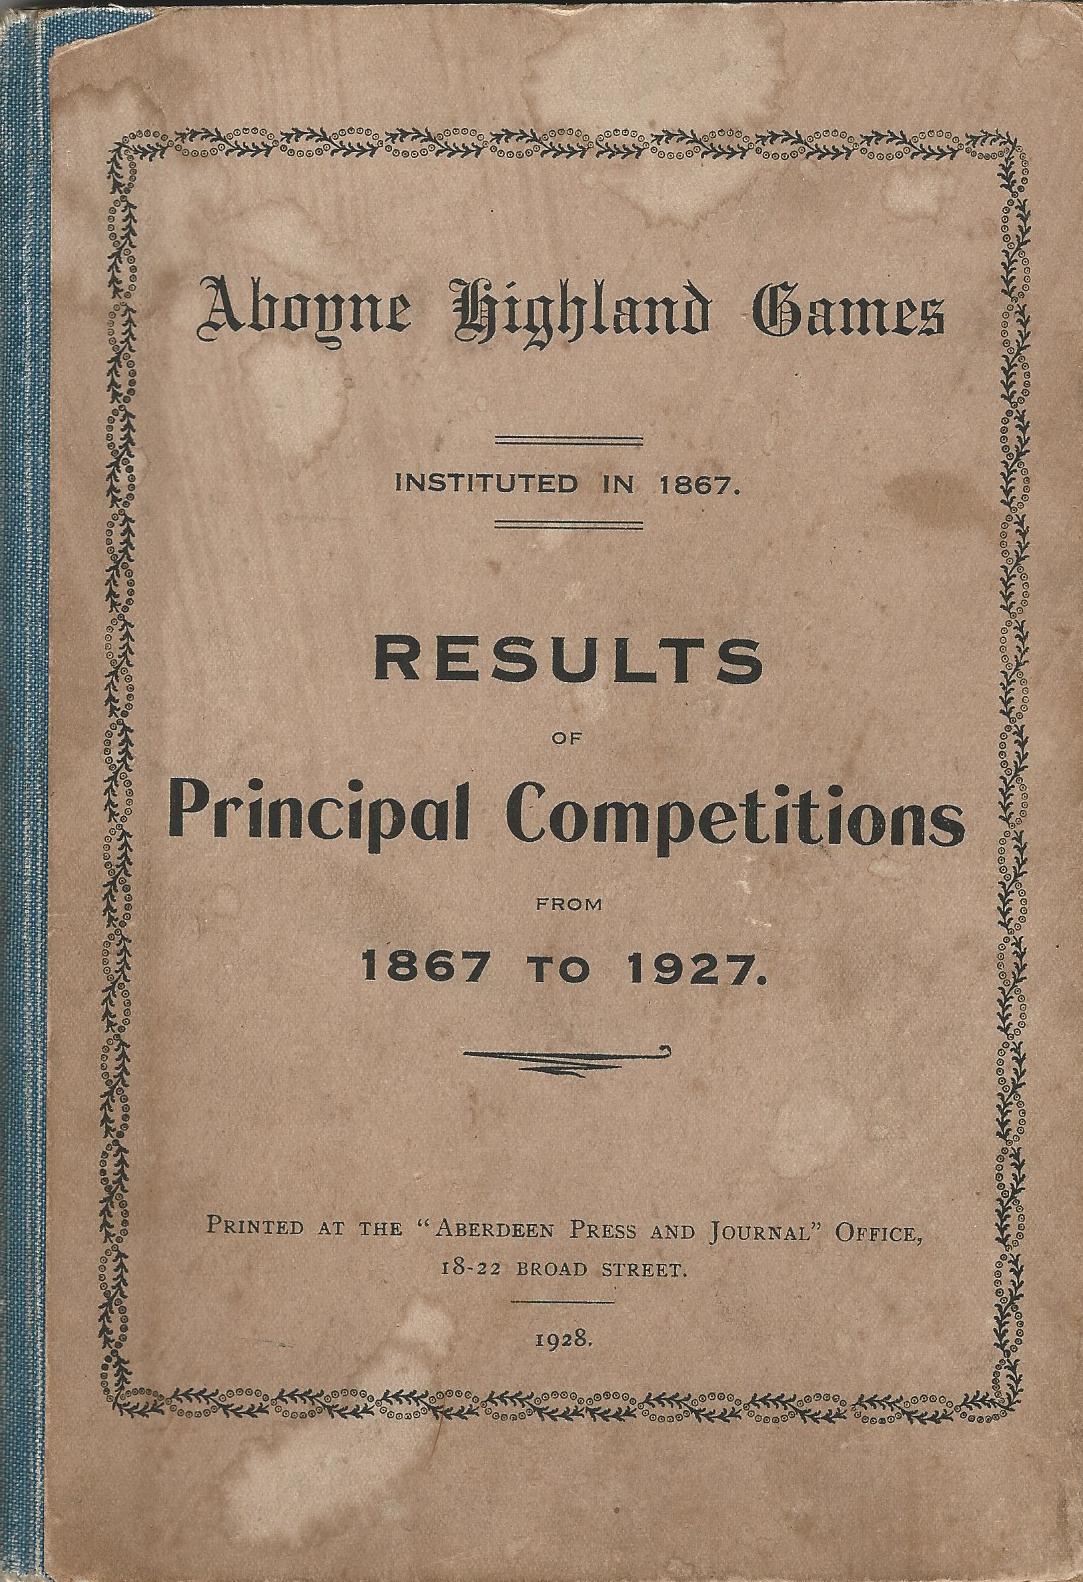 Image for Aboyne Highland Games: Results of Principal Competitions from 1867 to 1927